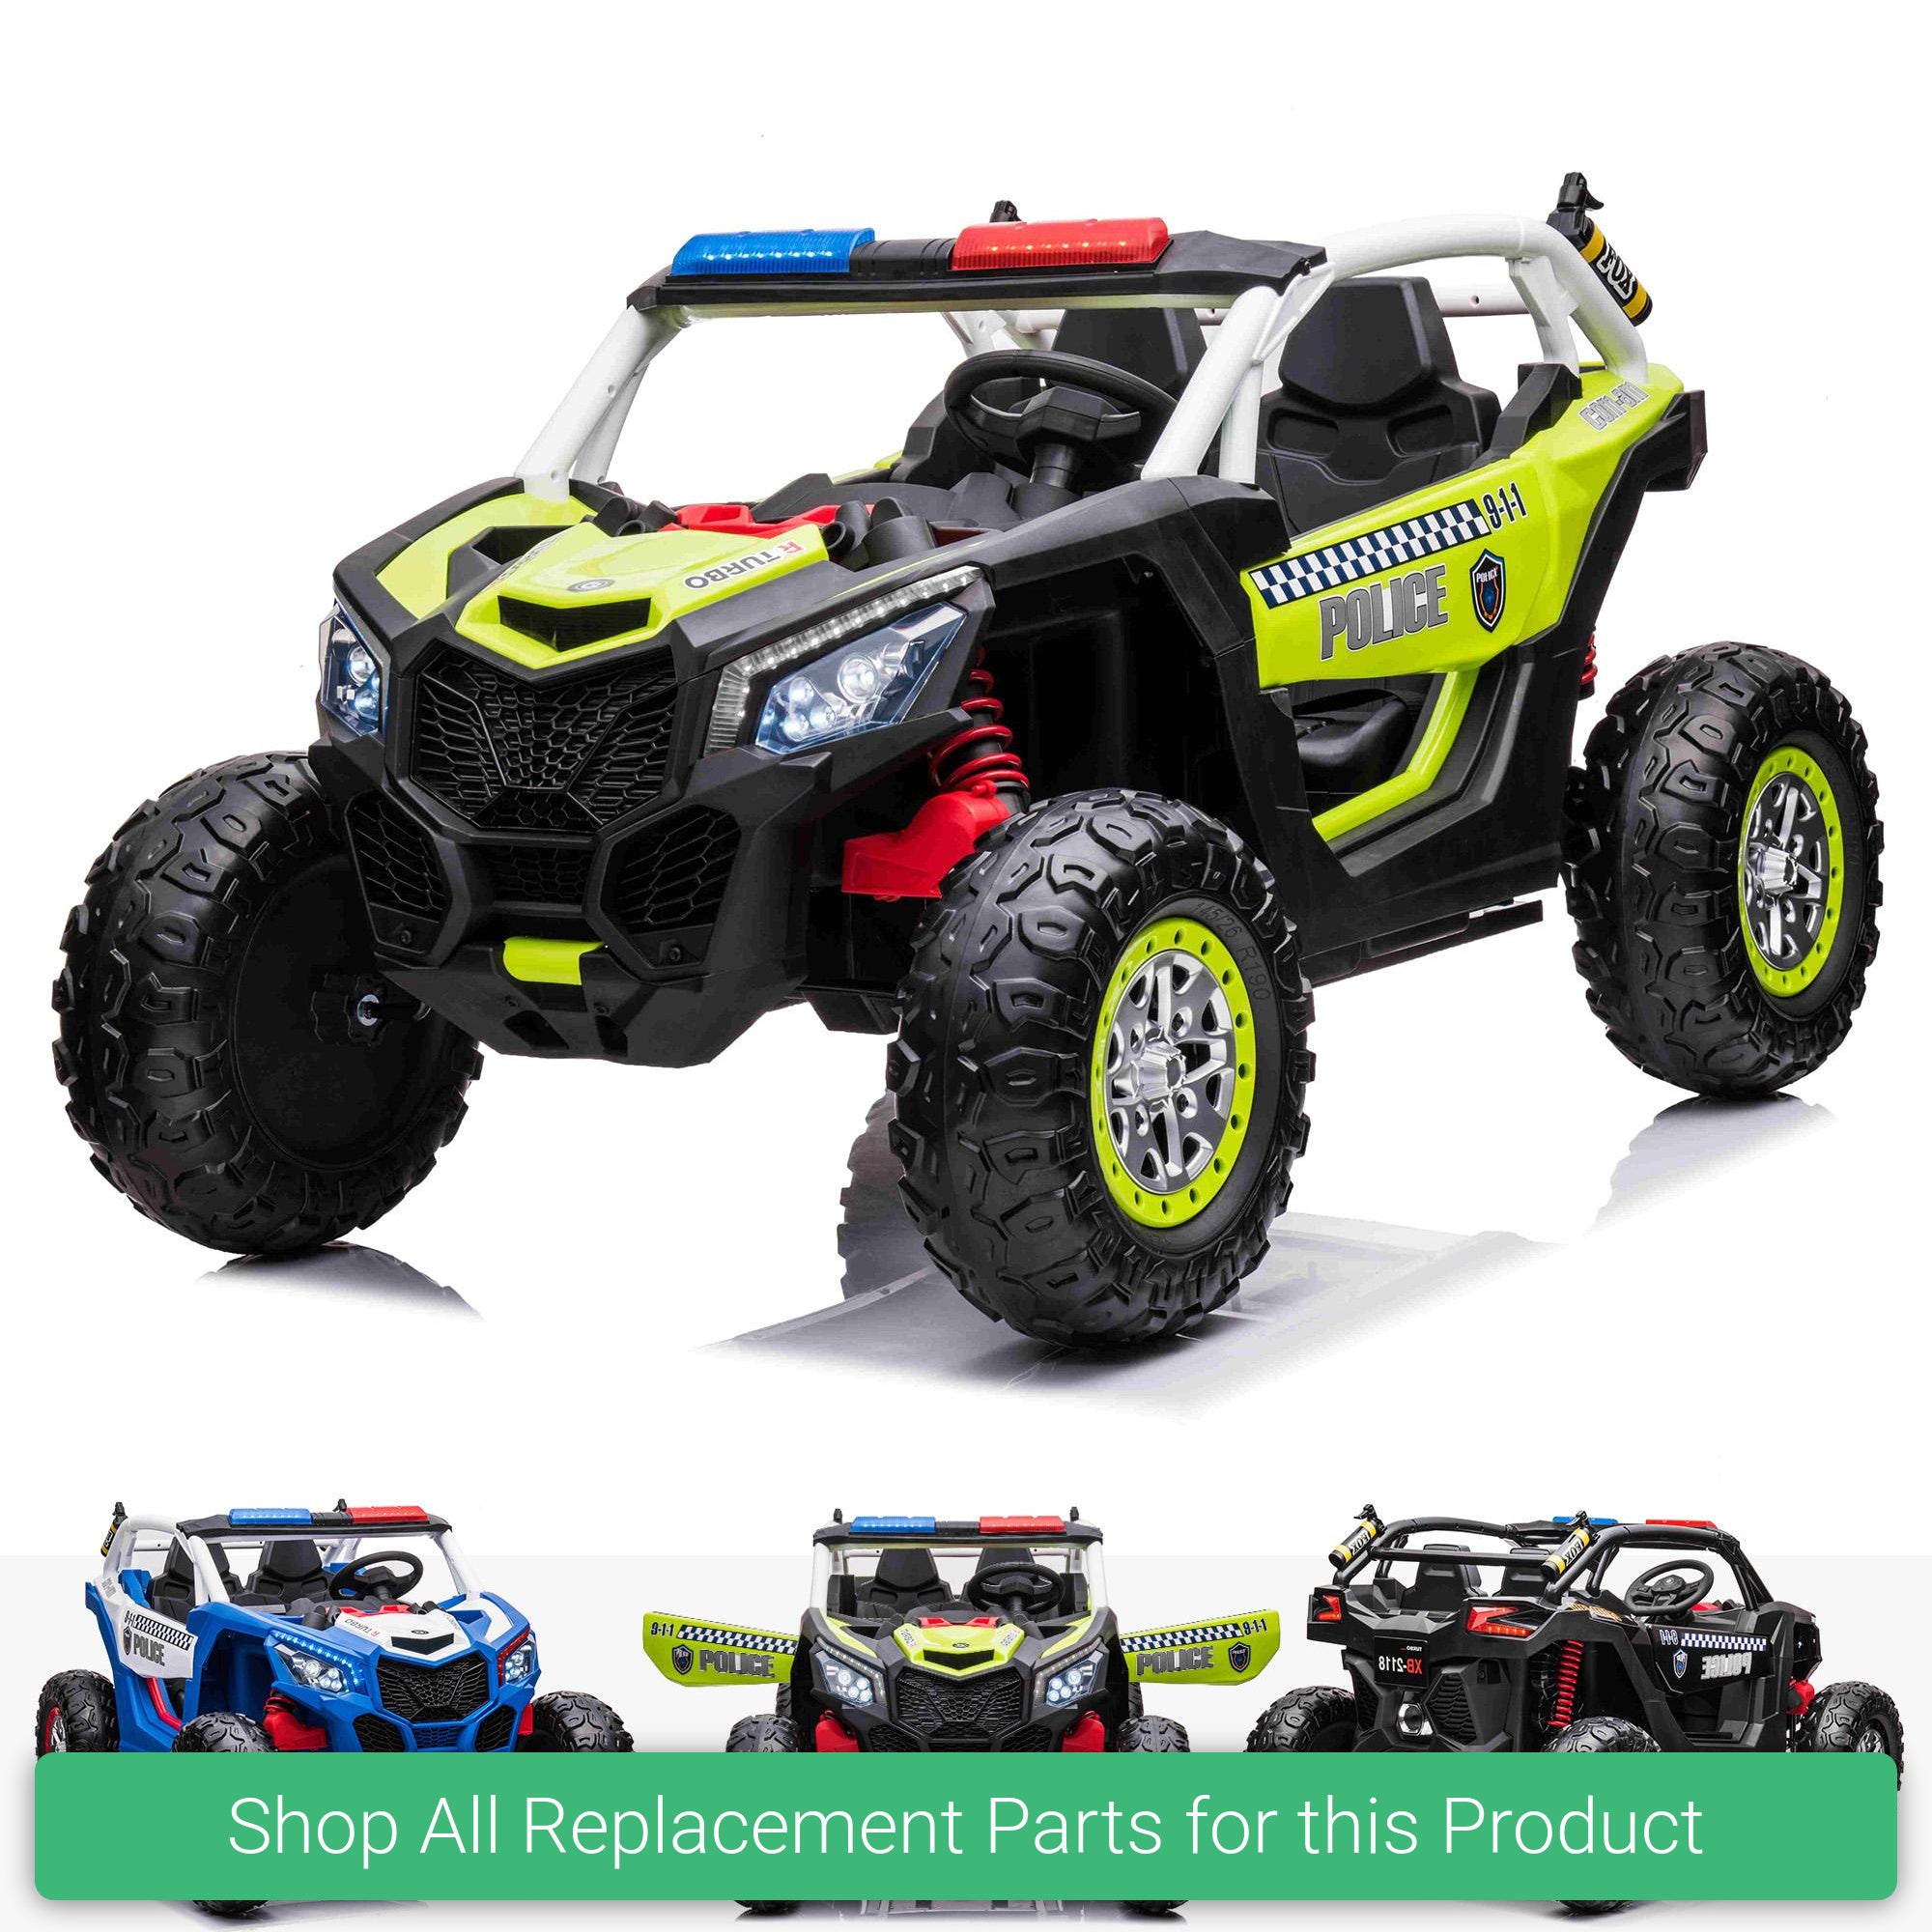 Replacement Parts and Spares for Kids Police UTV - POLICE-UTV-VARI - XB-2118 Four-Stage Motors